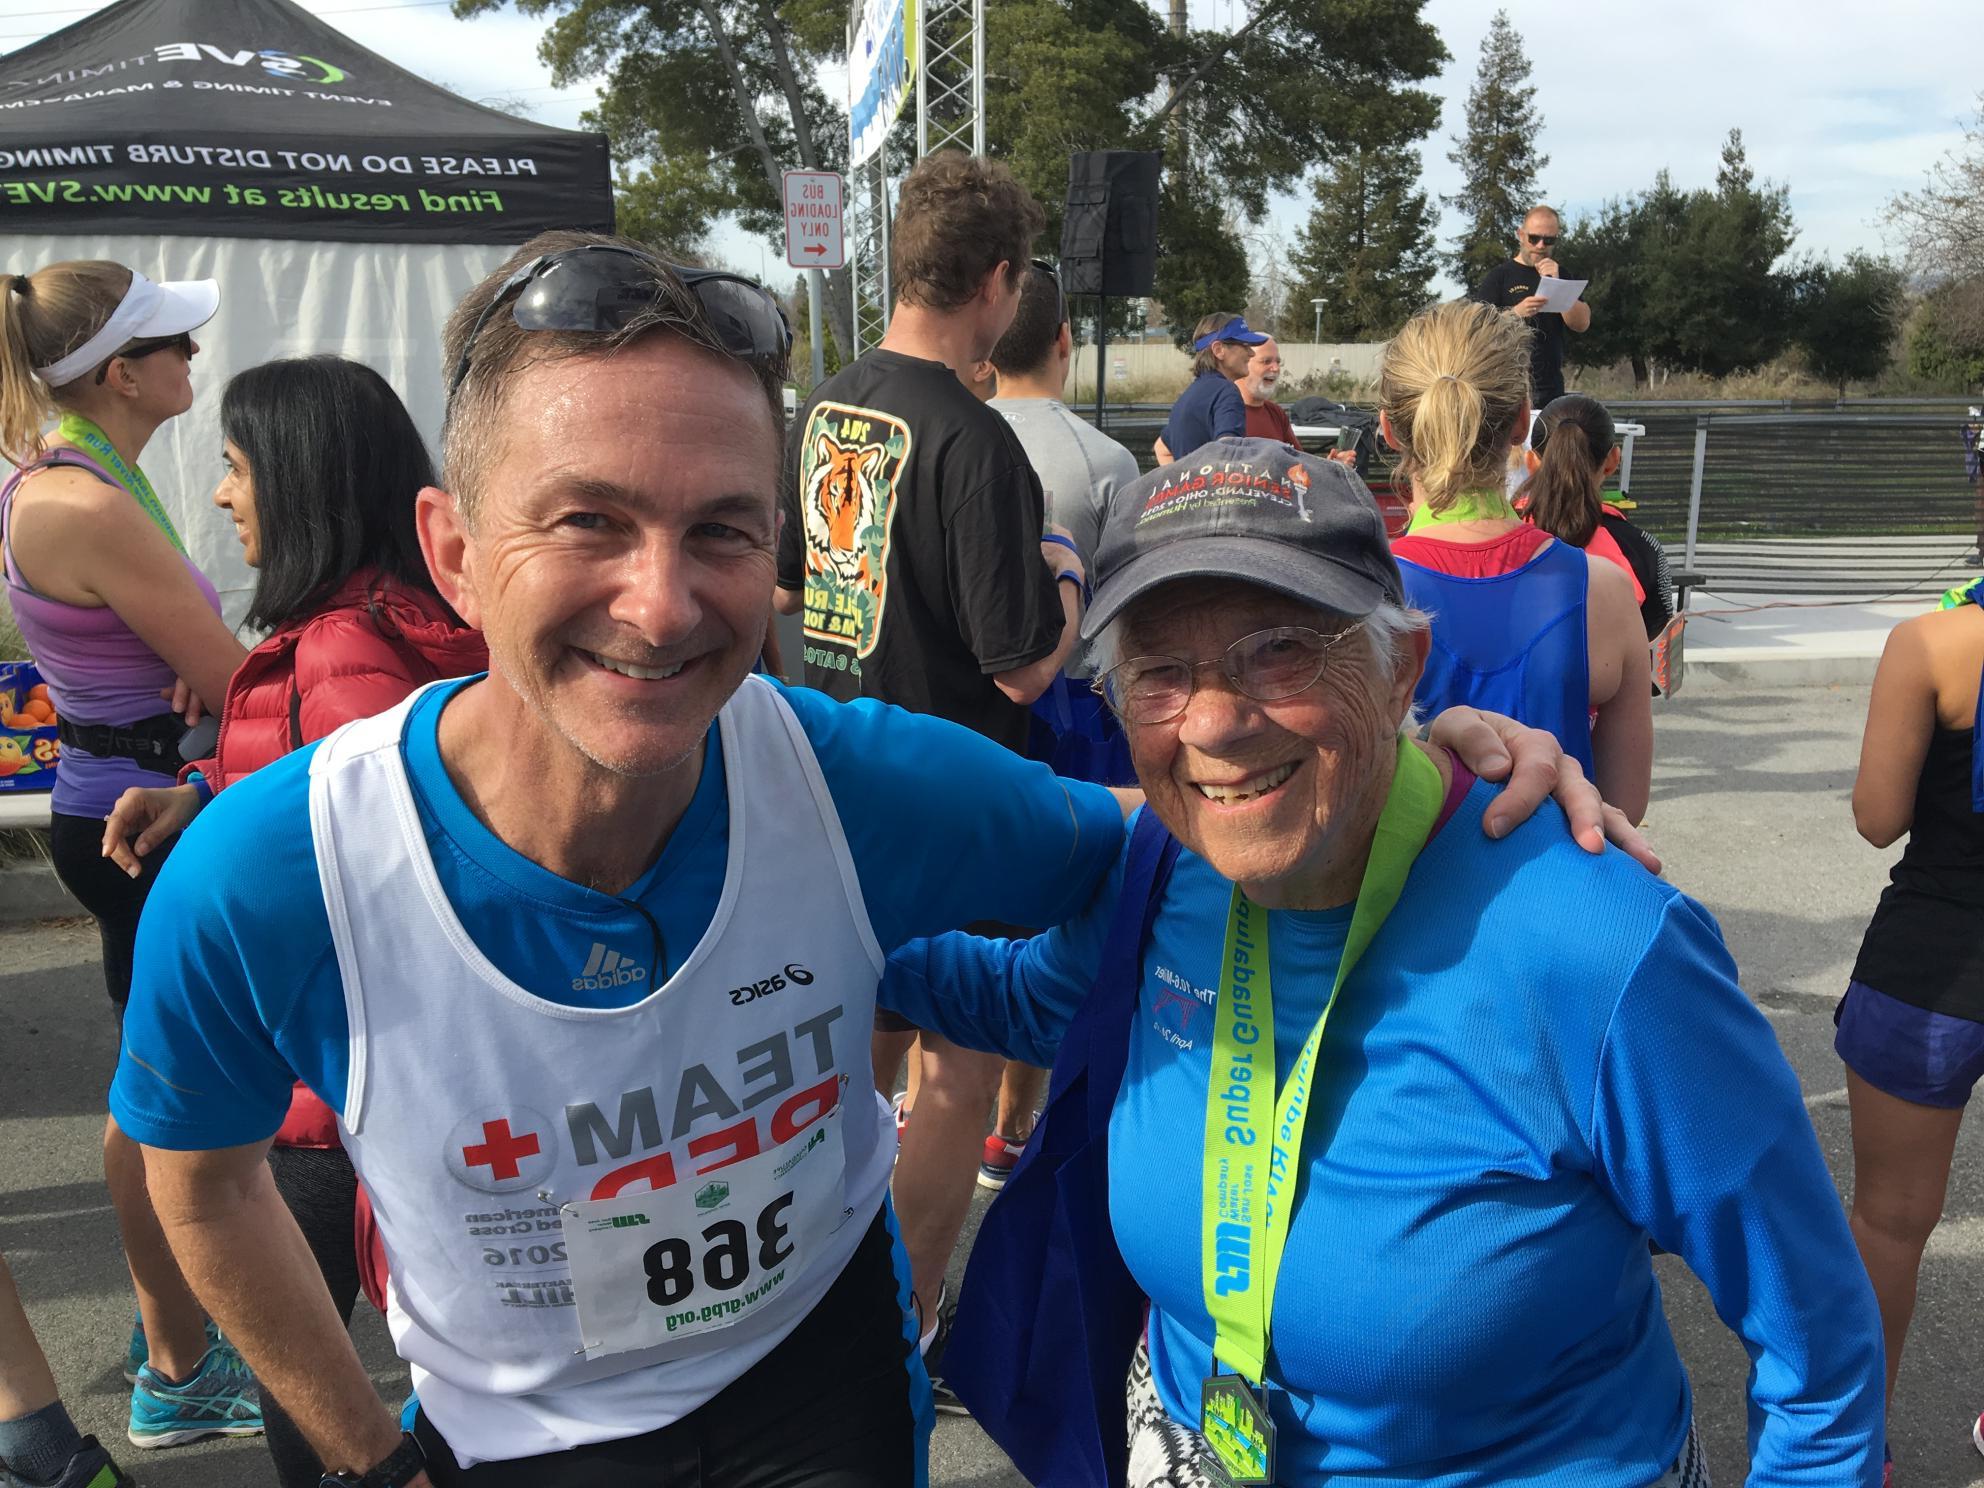 CEO Eric Thornburg standing with Phyllis, a 93 year old runner